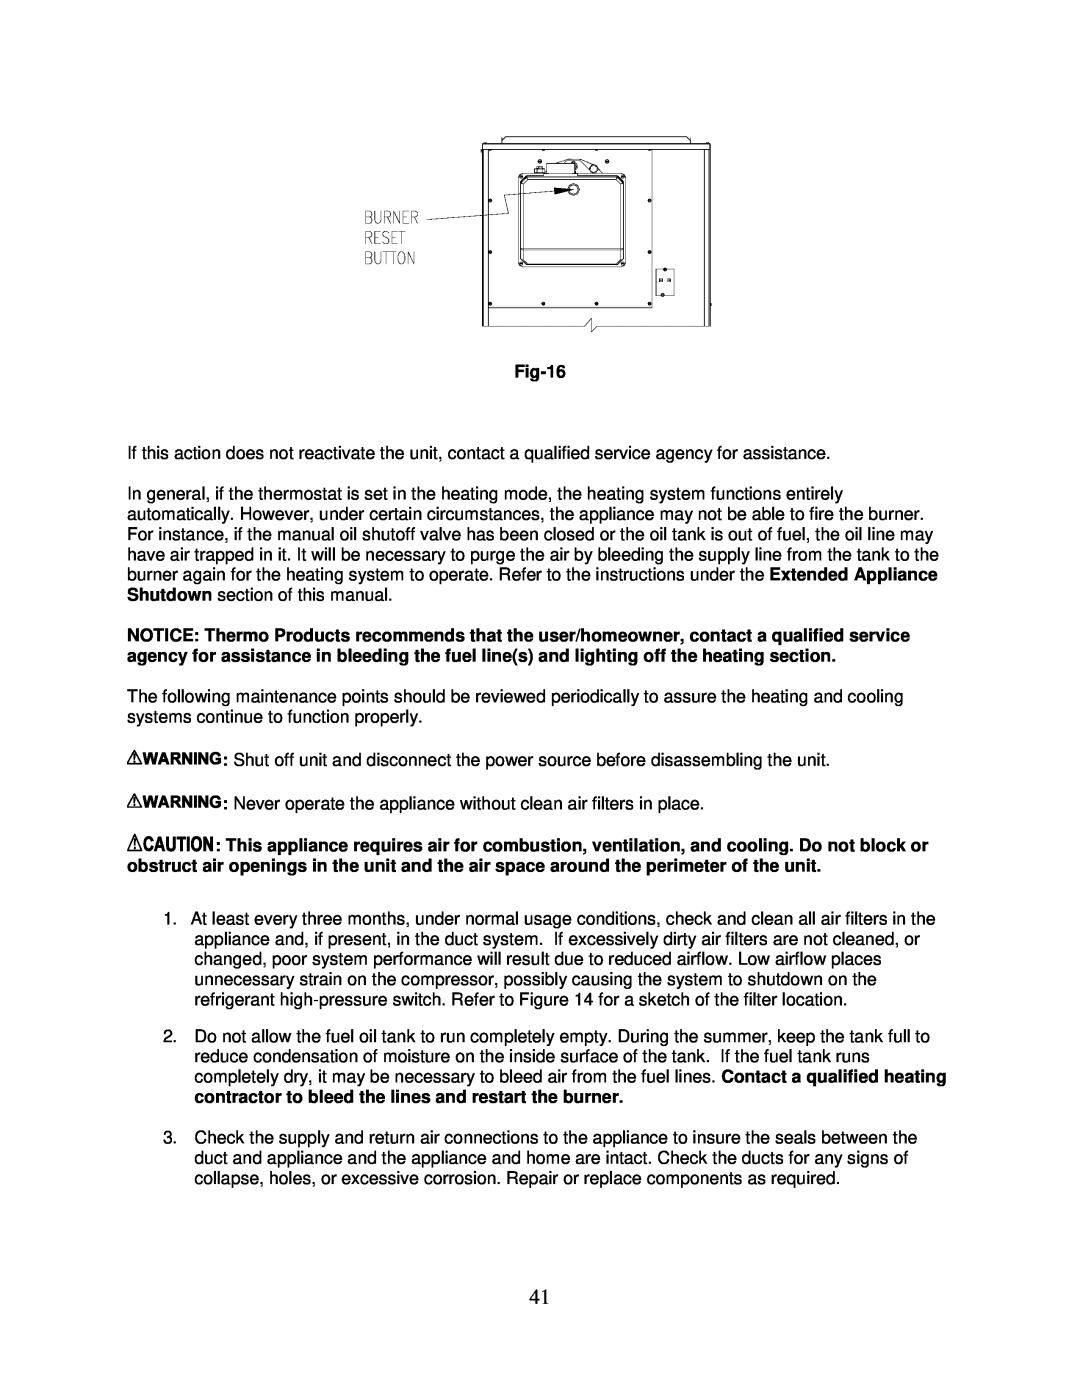 Thermo Products PHCFA072DV4R operation manual Fig-16 